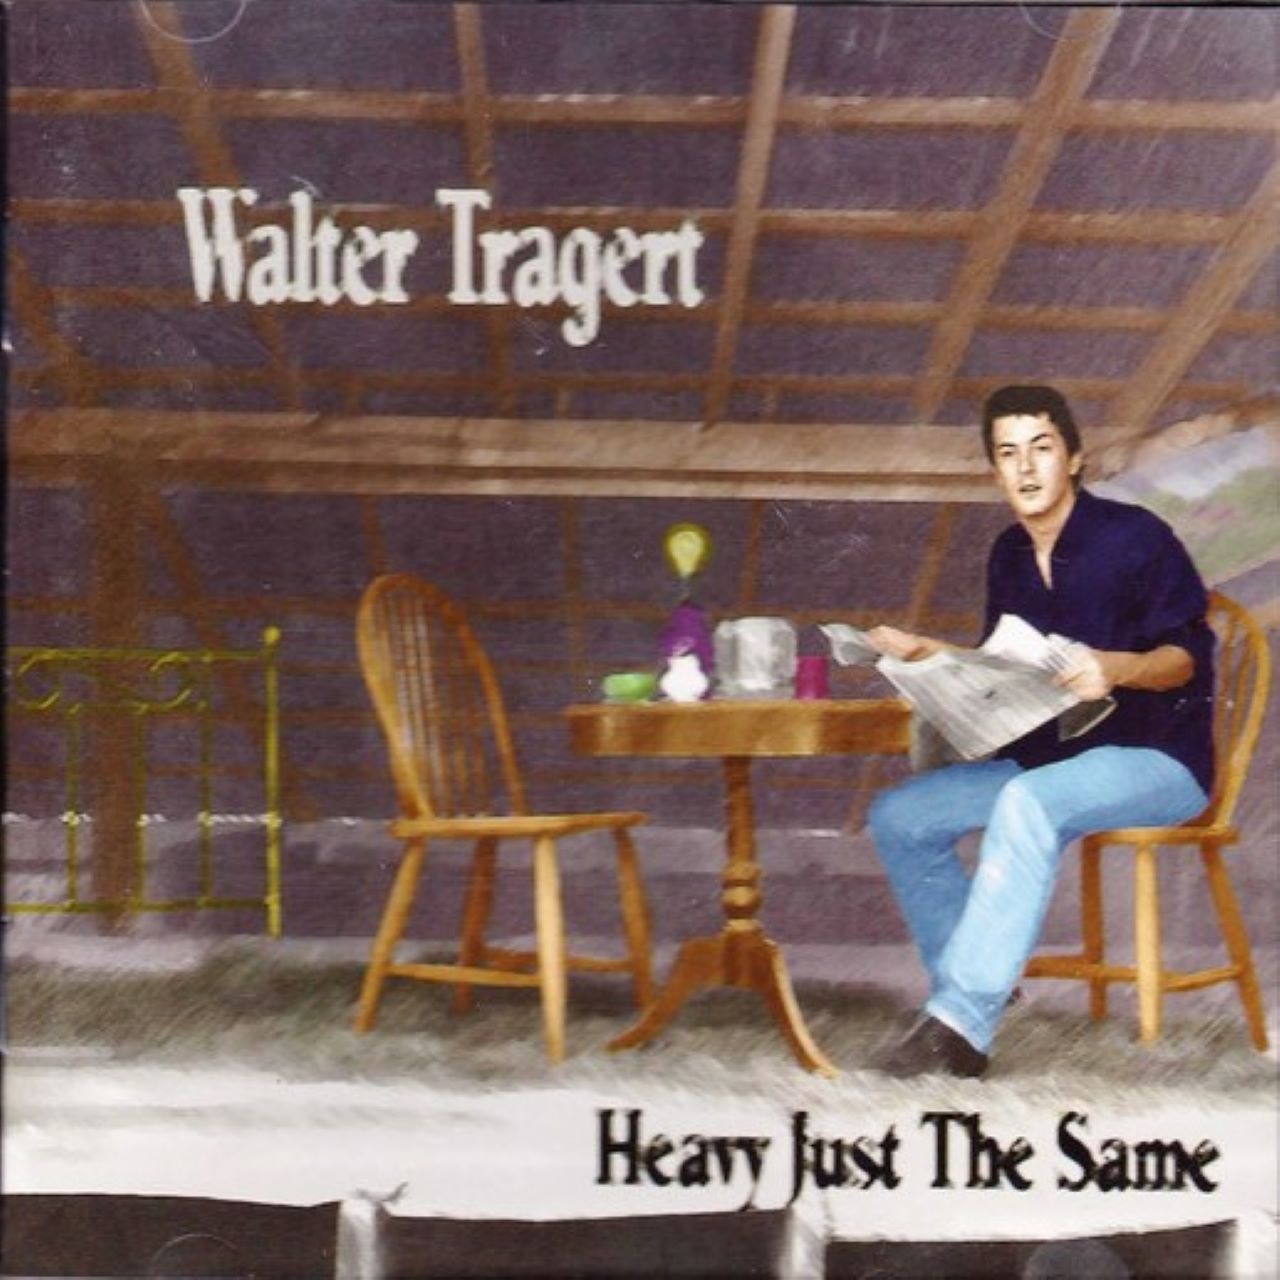 Walter Tragert - Heavy Just The Same cover album